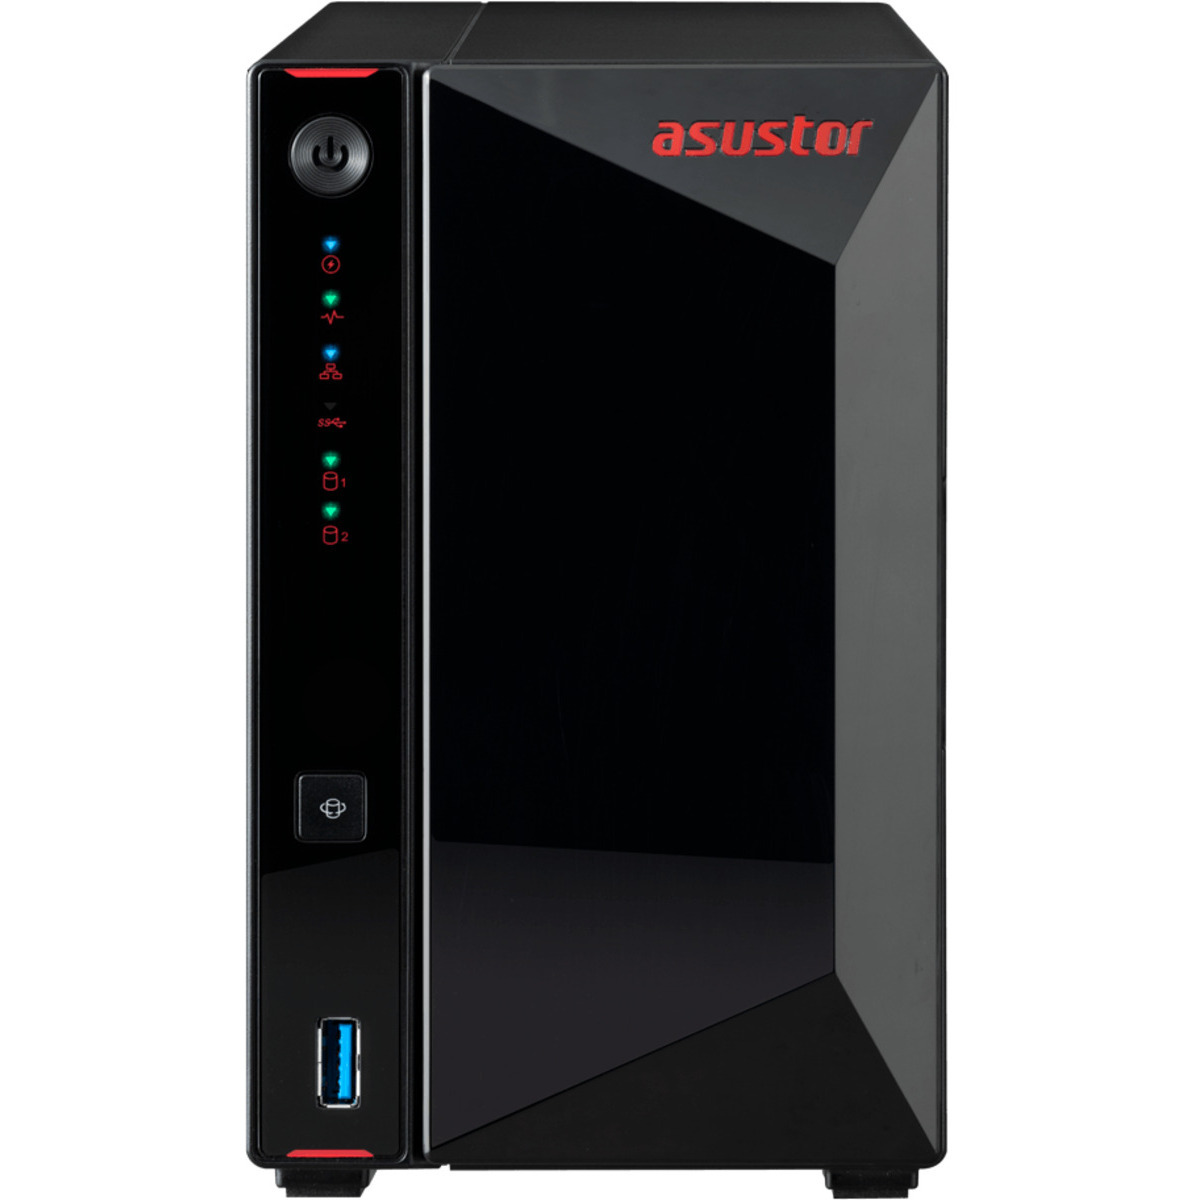 buy $891 ASUSTOR AS5202T Nimbustor 4tb Desktop NAS - Network Attached Storage Device 2x2000gb Western Digital Red SA500 WDS200T1R0A 2.5 560/530MB/s SATA 6Gb/s SSD NAS Class Drives Installed - Burn-In Tested - FREE RAM UPGRADE - nas headquarters buy network attached storage server device das new raid-5 free shipping usa AS5202T Nimbustor